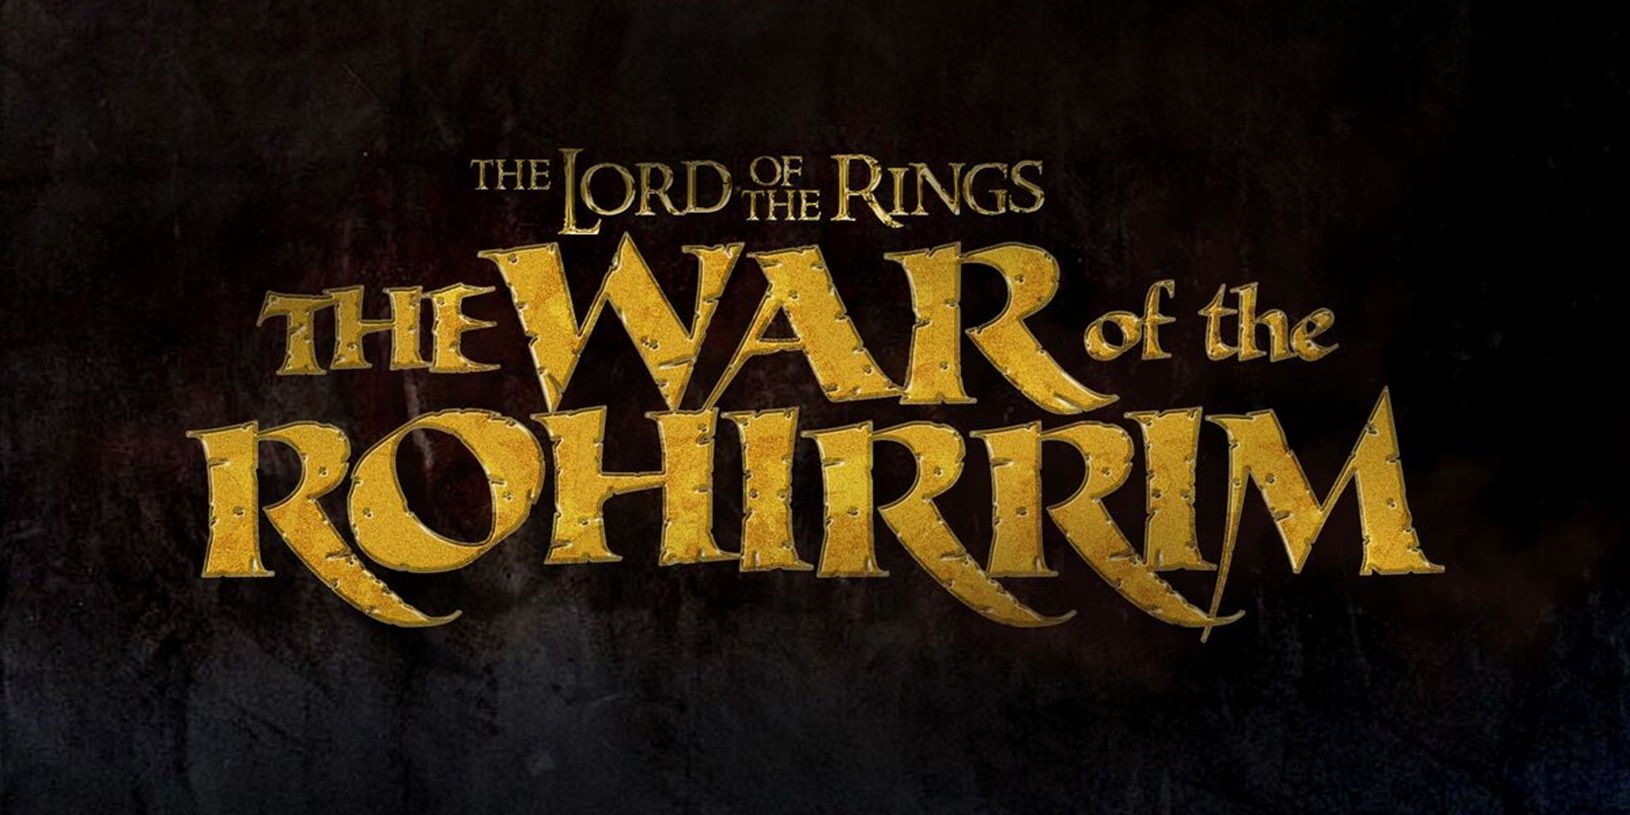 The logo for The Lord of the Rings The War of the Rohirrim